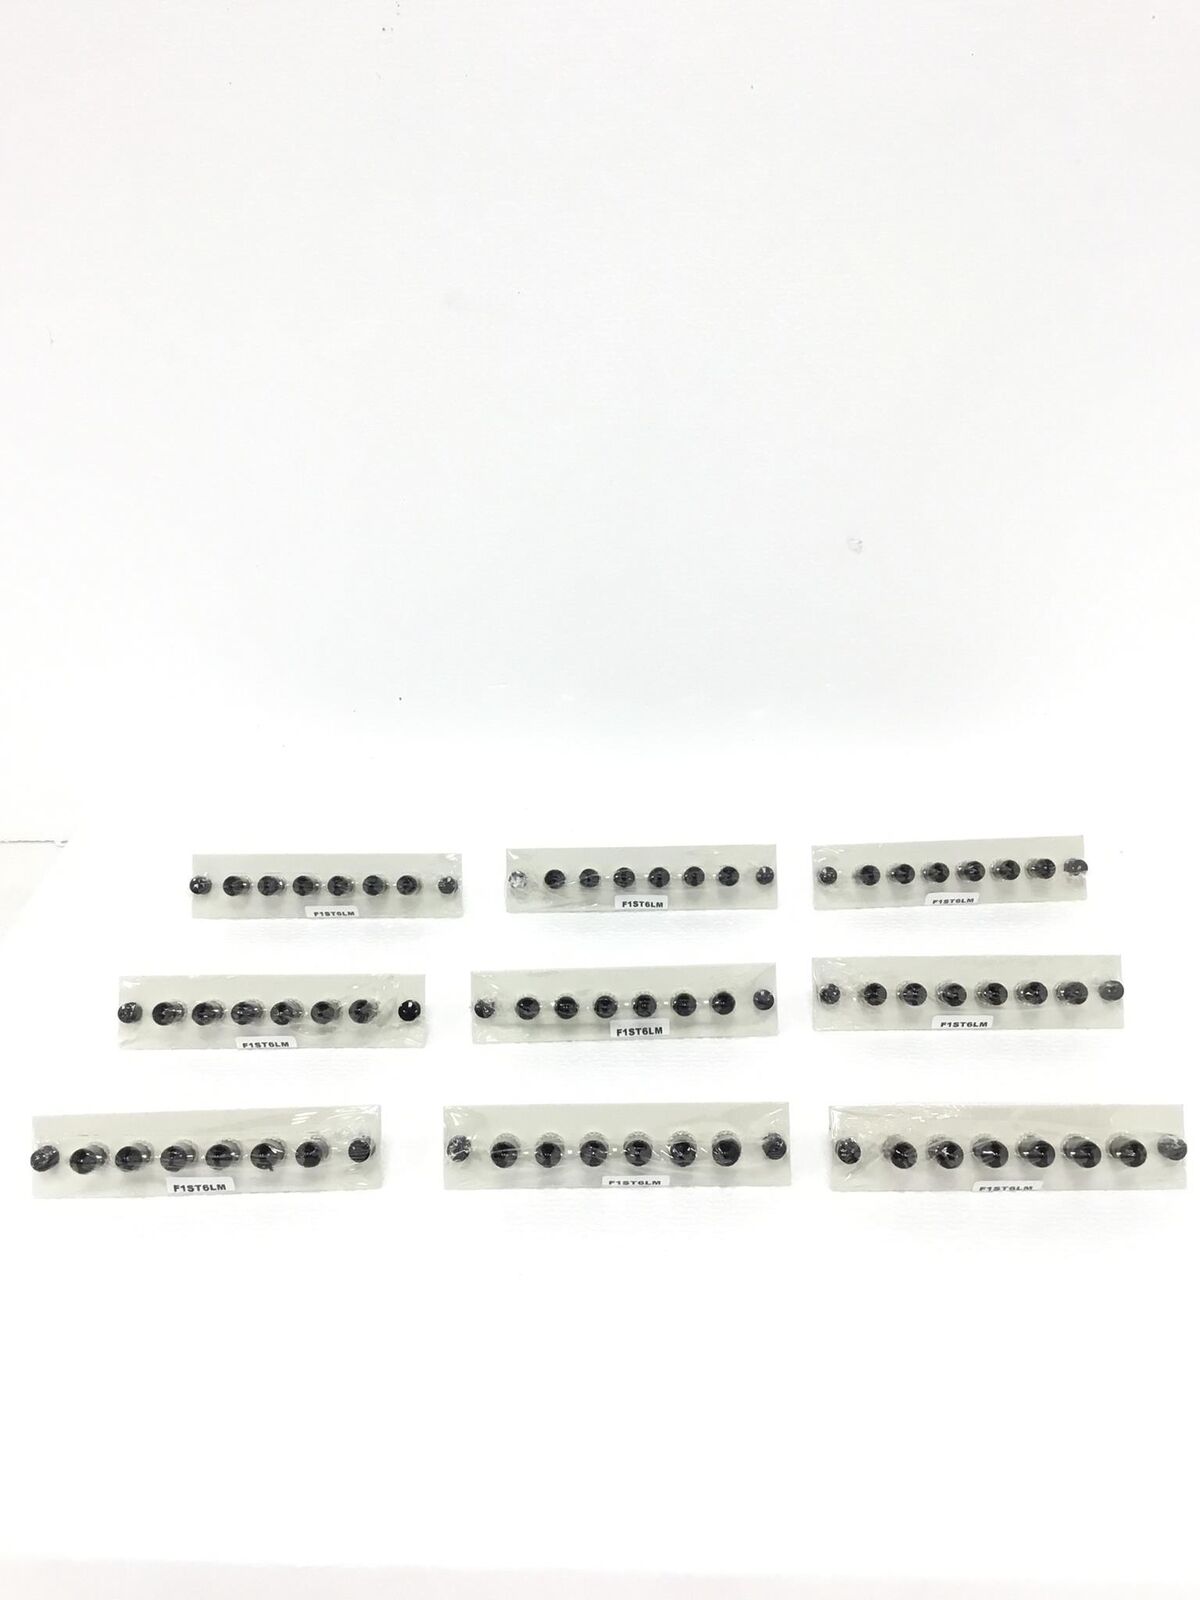 NEW Lot of 3 Patch Adapter 8-Port Panel F1ST6LM,  QTY AVAILABLE